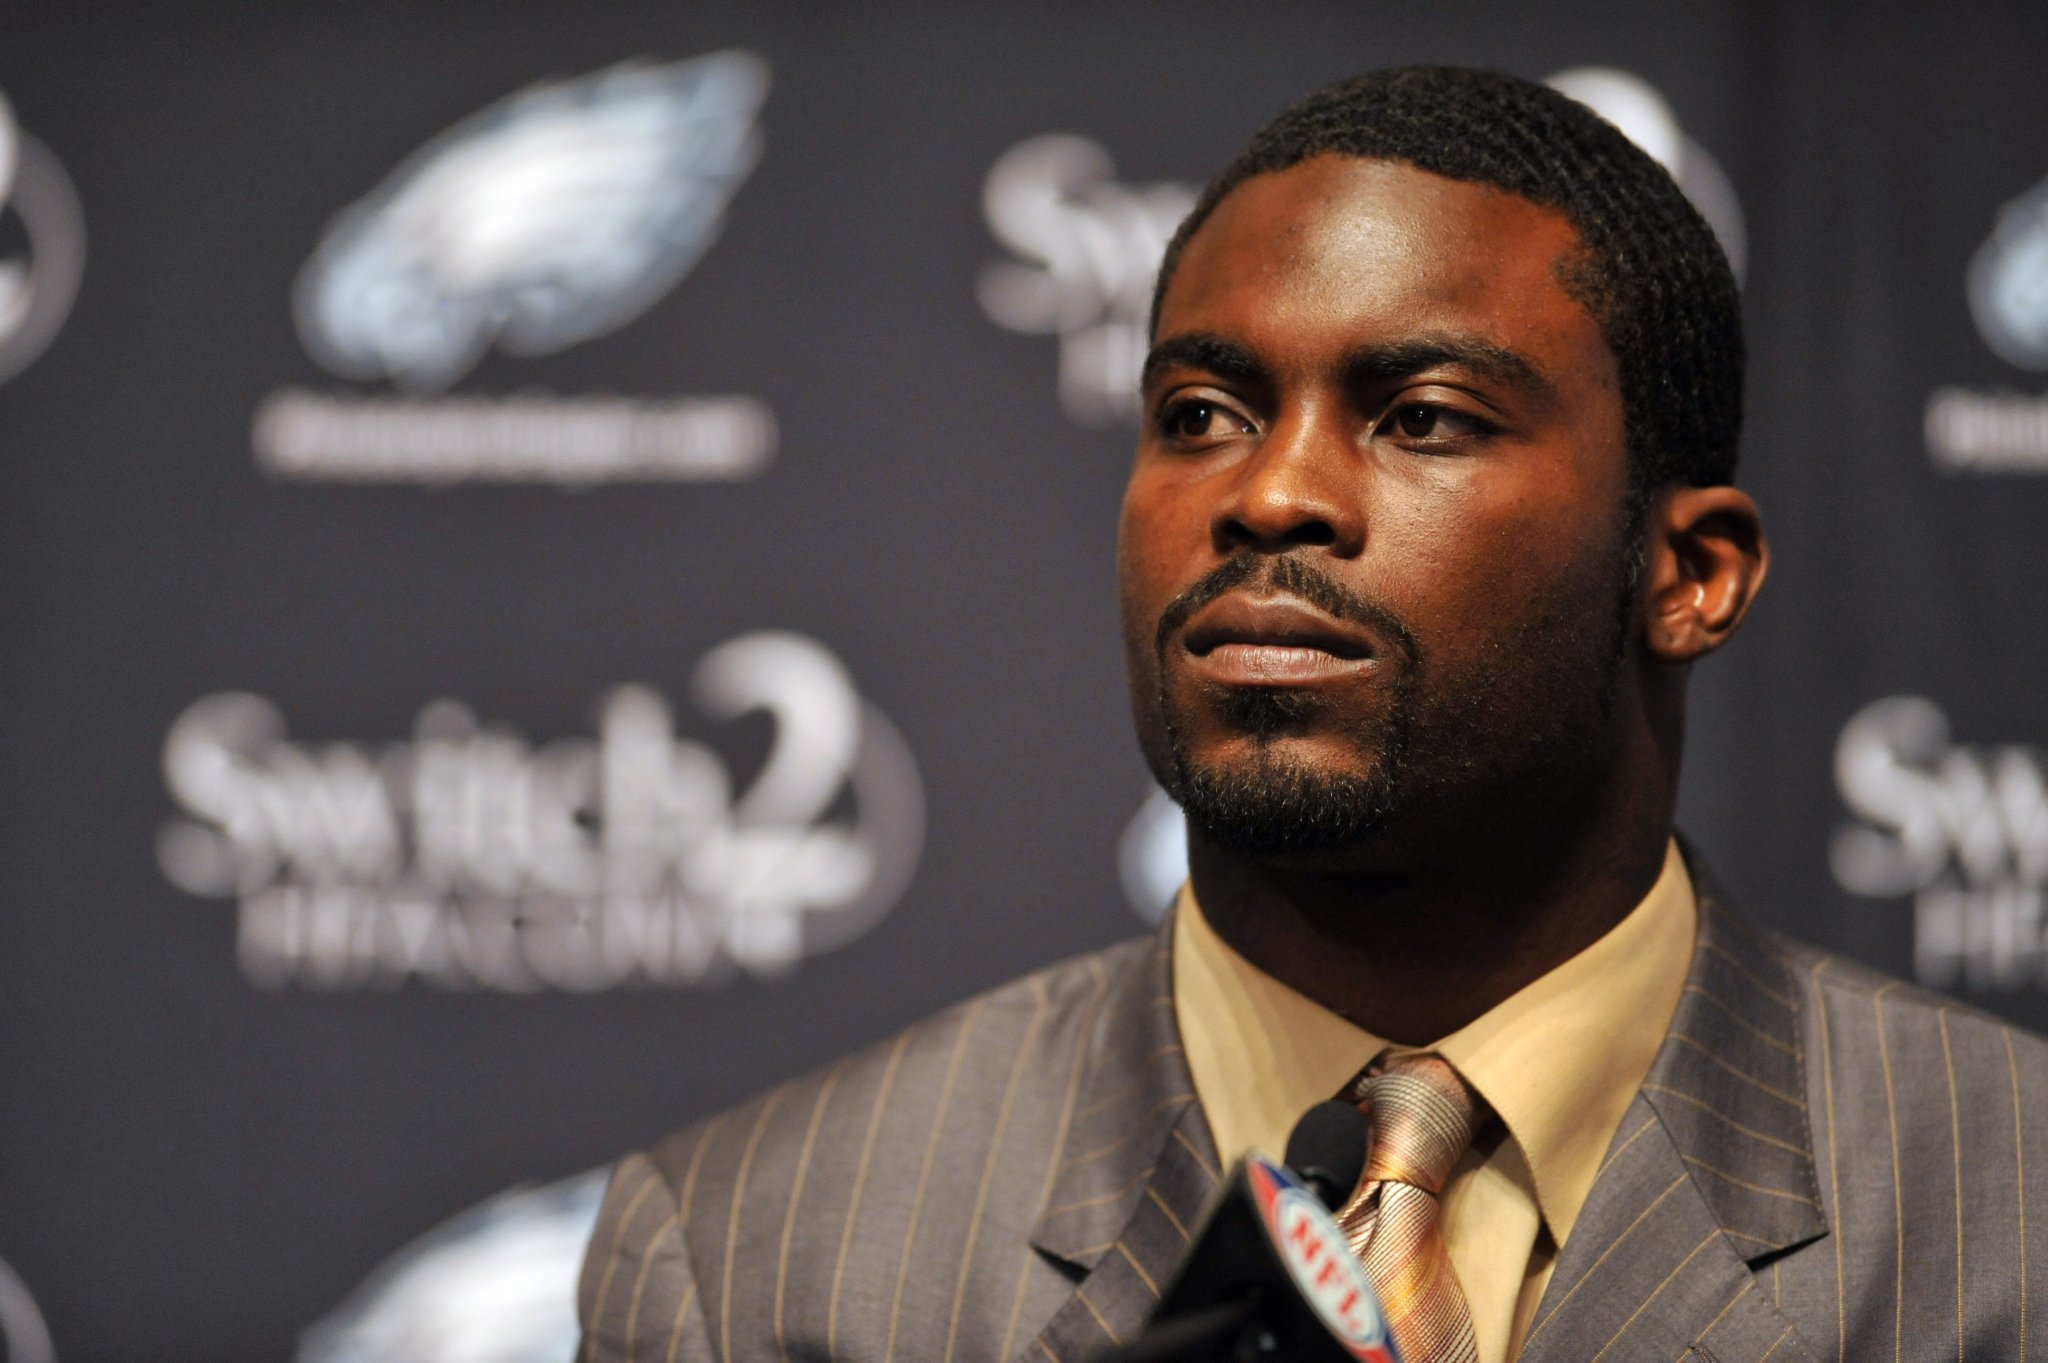 Michael Vick Is Reportedly Being Sued For Over $1 Million